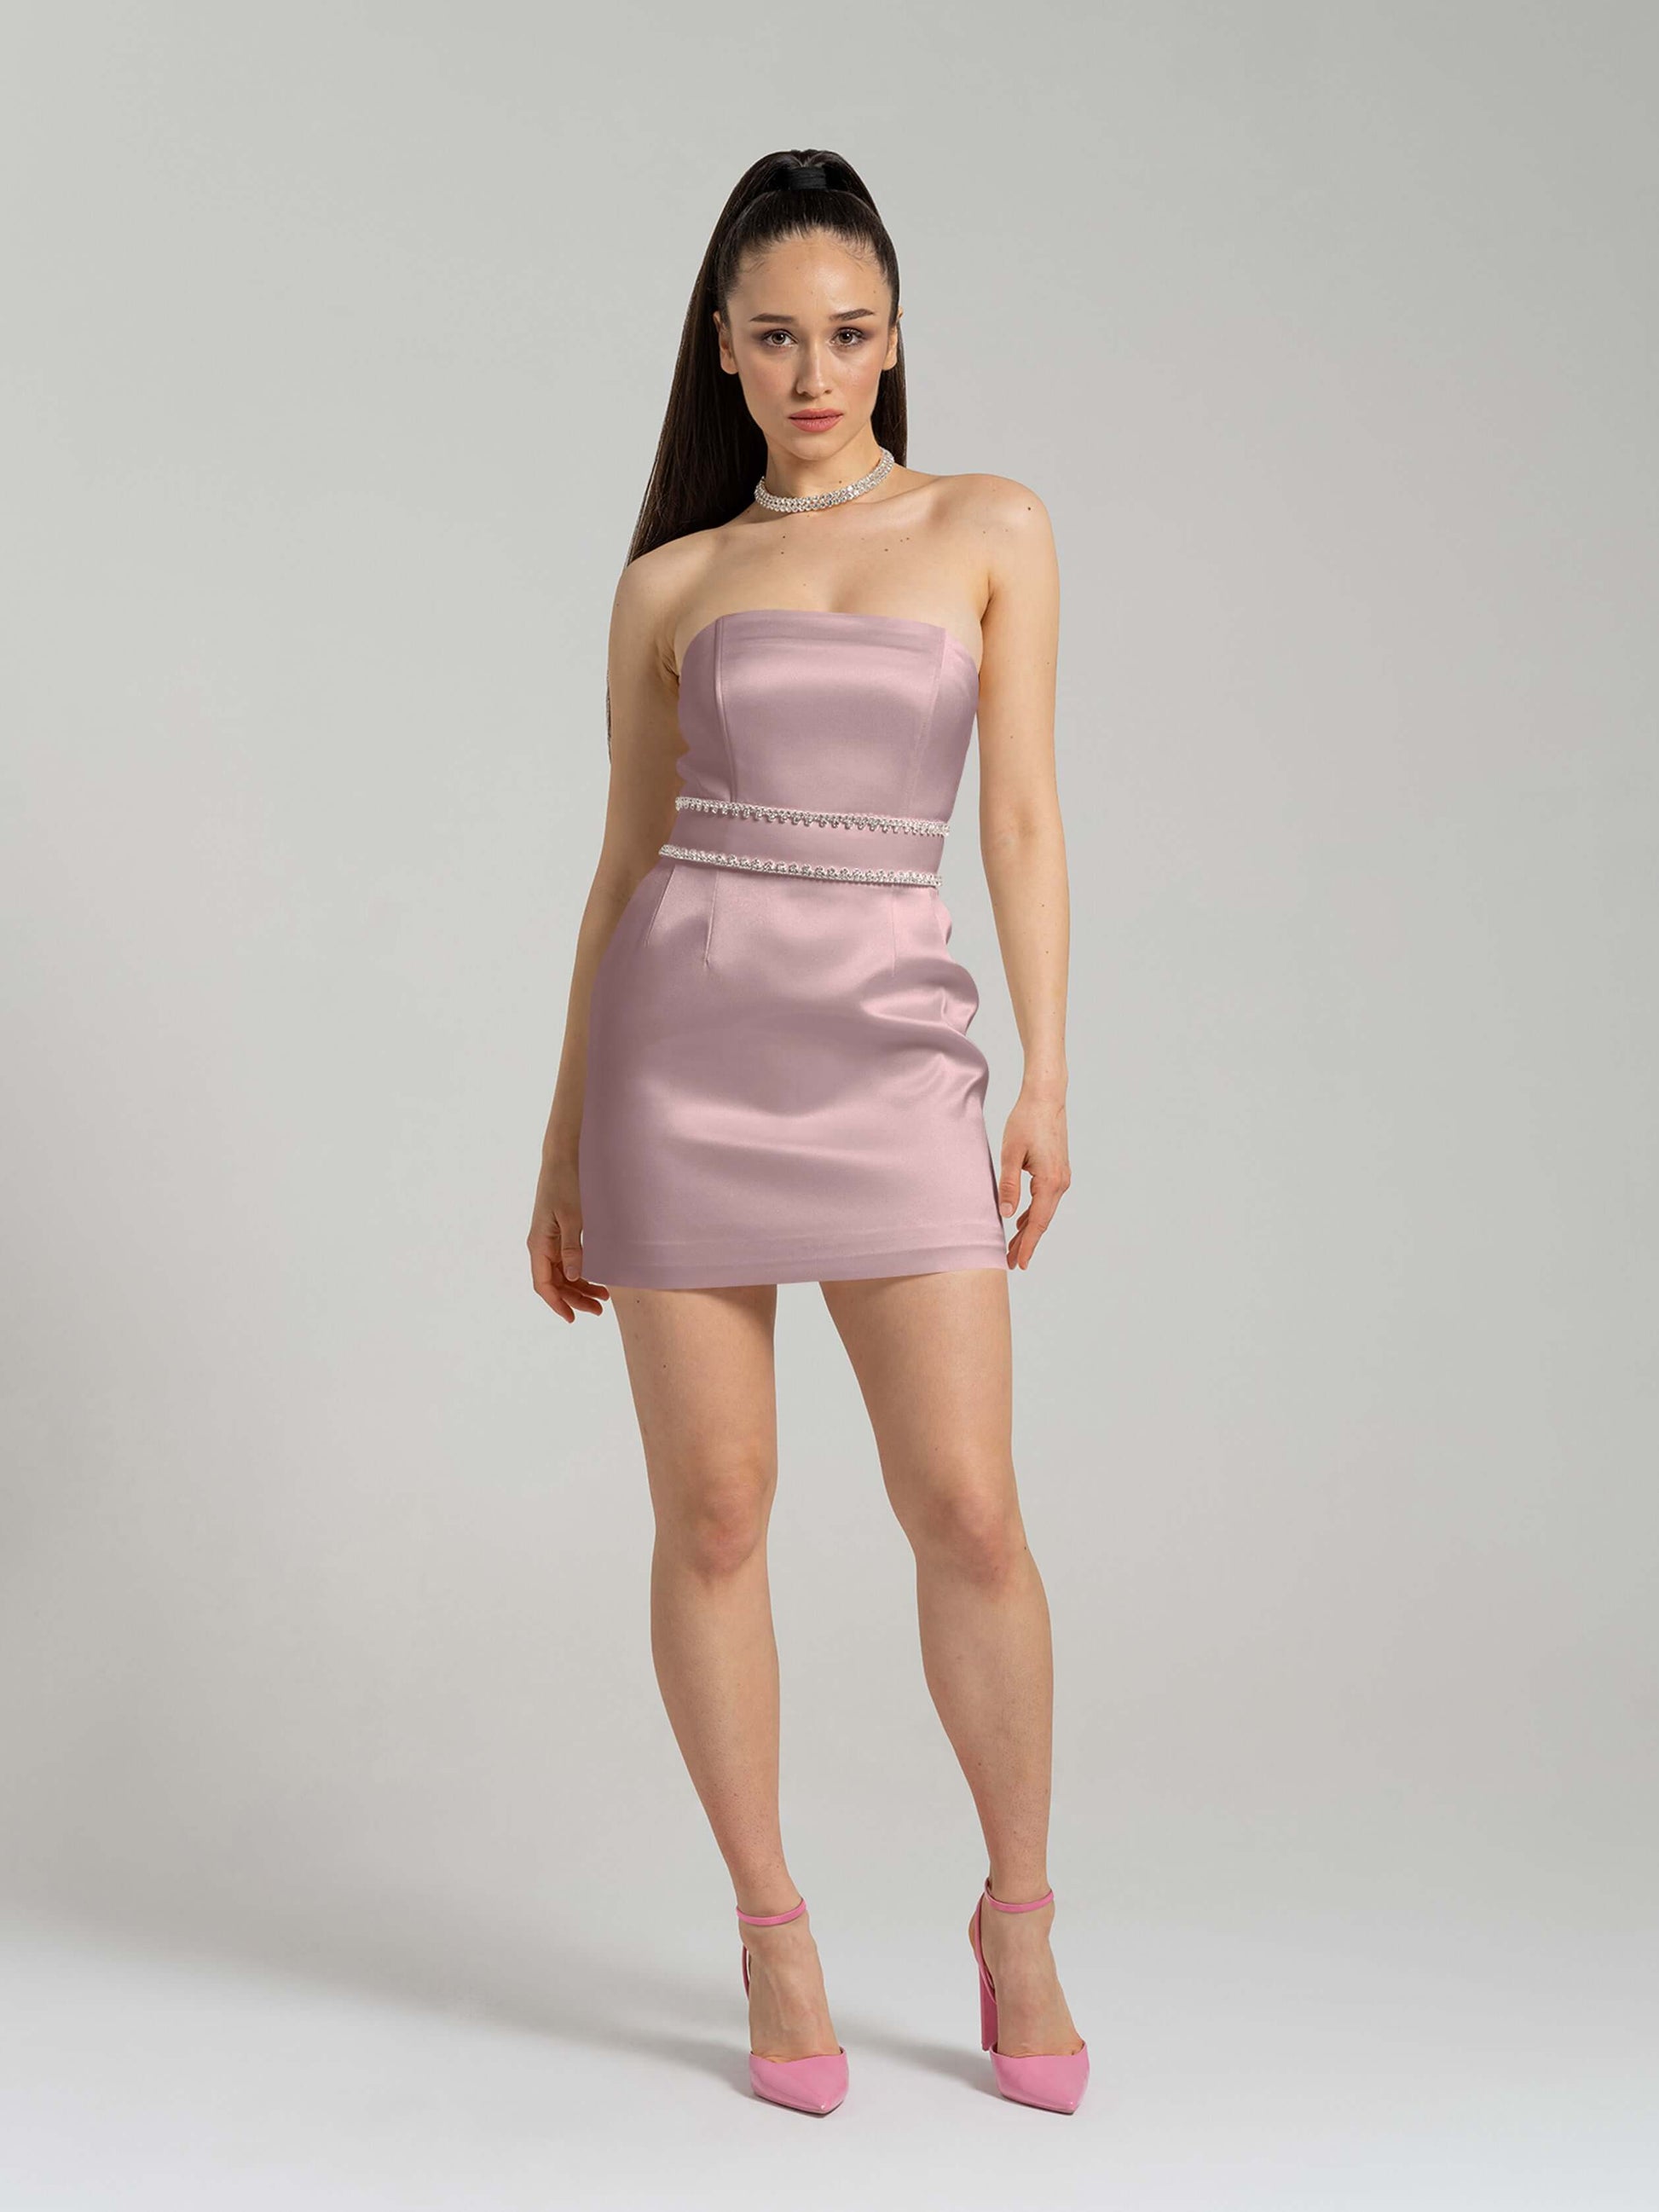 Elevated Excellence Mini Dress - Soft Pink by Tia Dorraine Women's Luxury Fashion Designer Clothing Brand